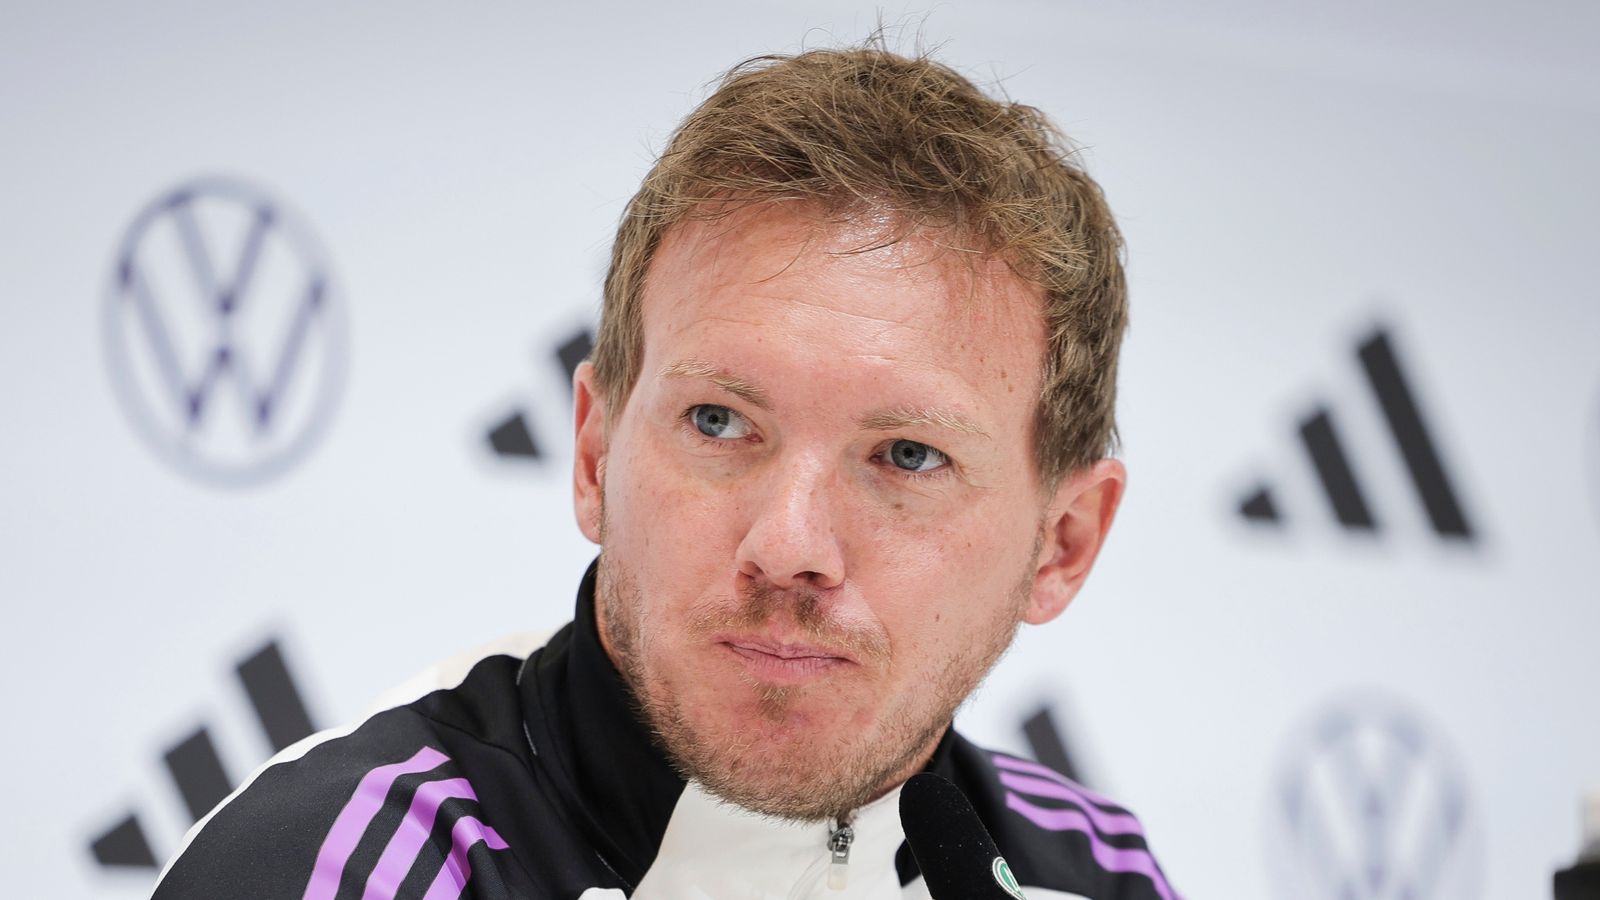 Nagelsmann said it was madness for the broadcaster to ask